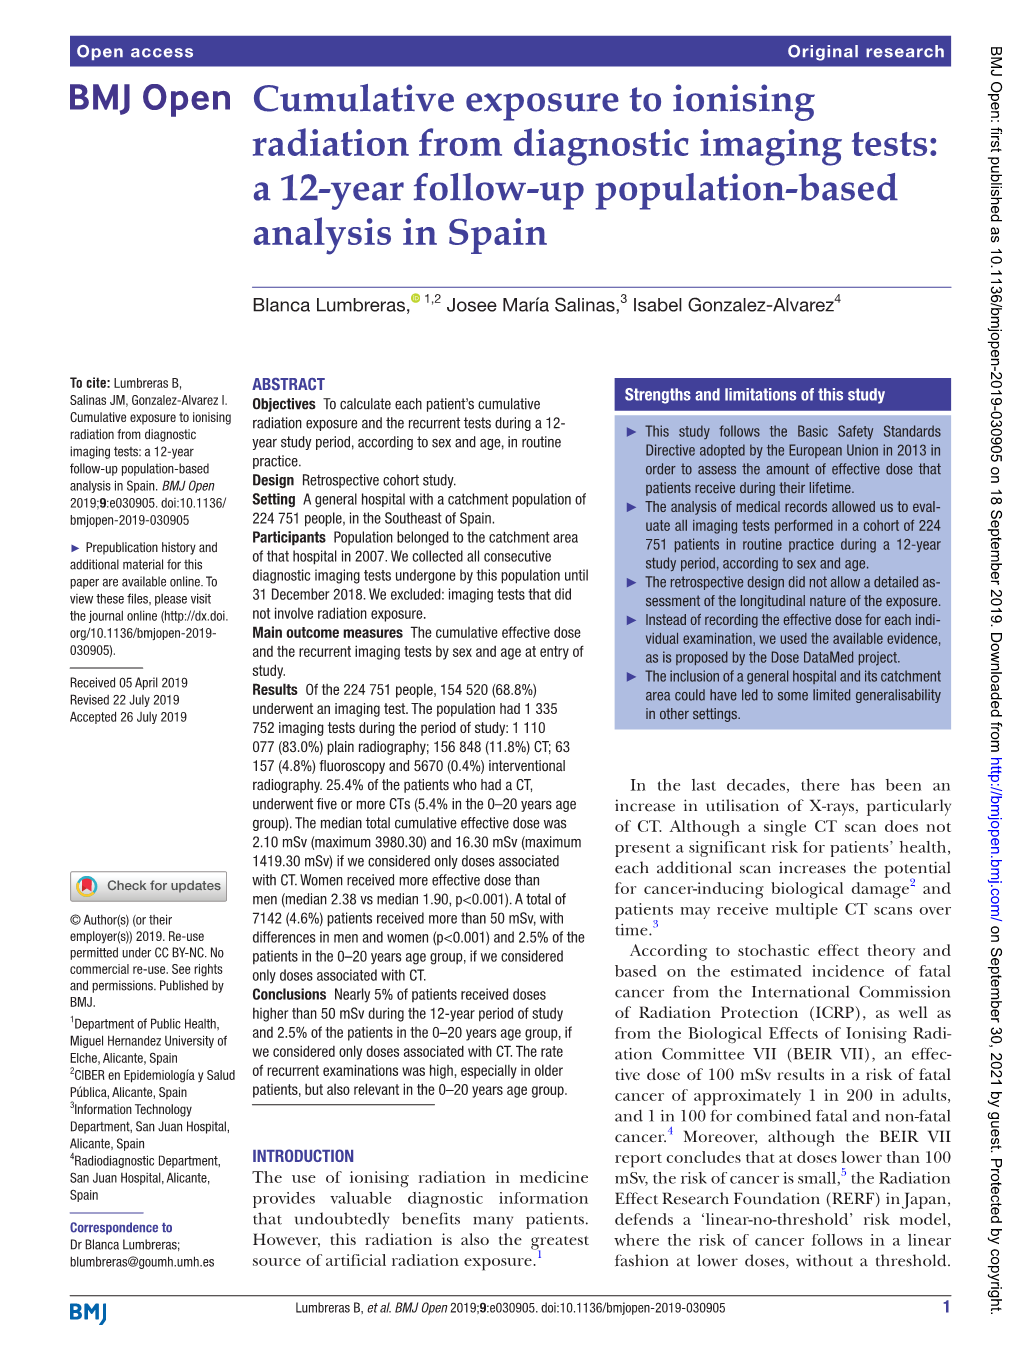 Cumulative Exposure to Ionising Radiation from Diagnostic Imaging Tests: a 12-Year Follow-Up Population-Based Analysis in Spain